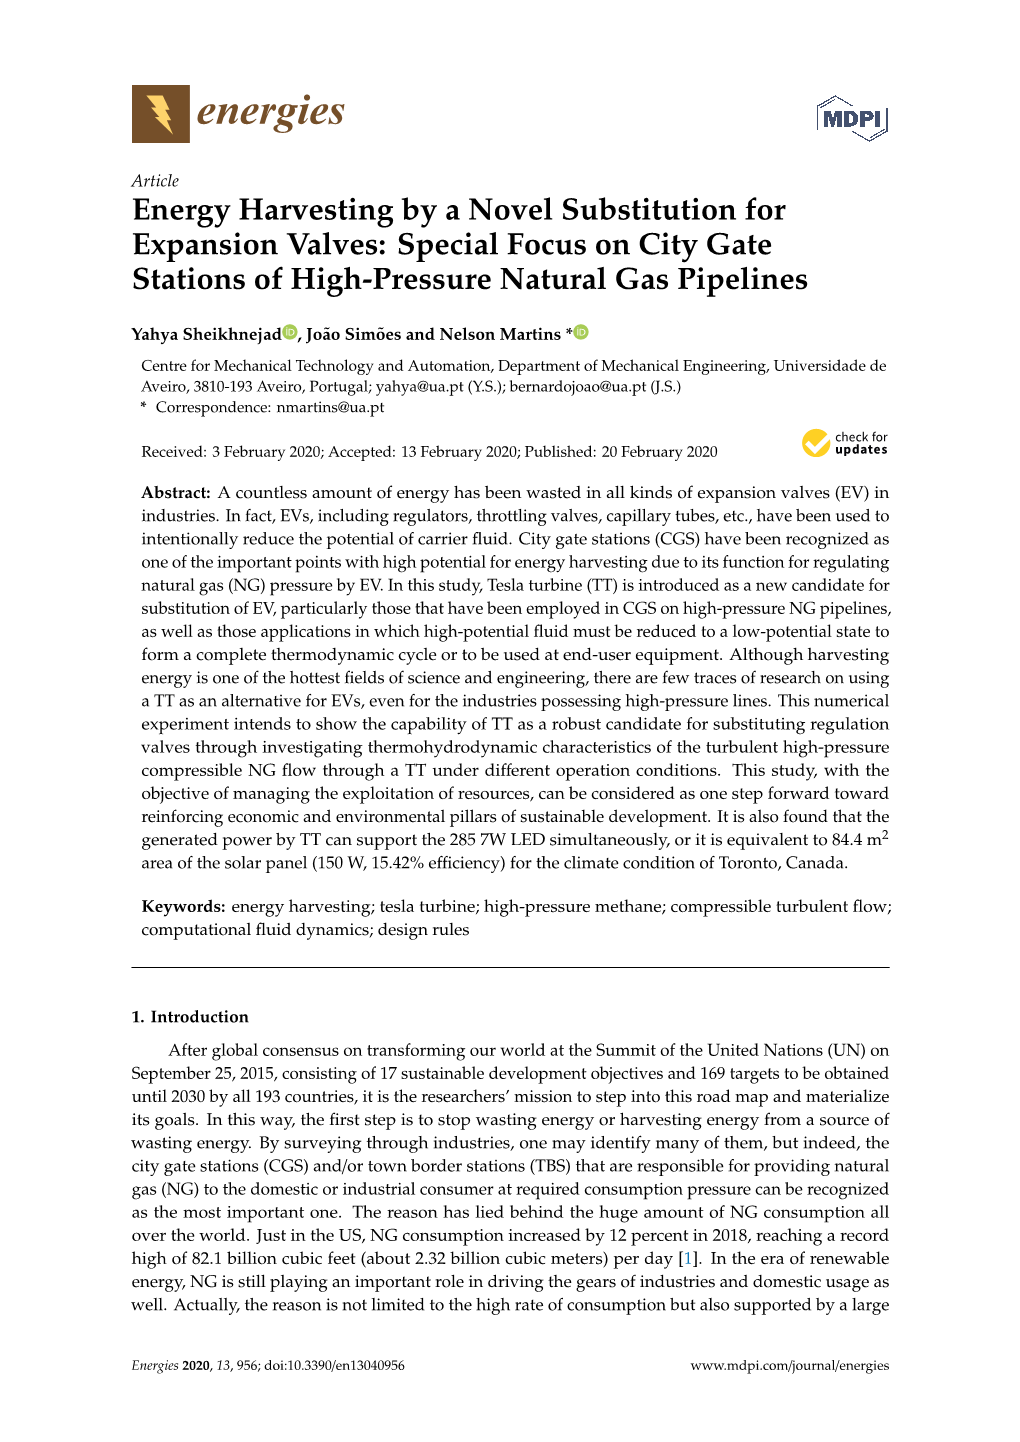 Energy Harvesting by a Novel Substitution for Expansion Valves: Special Focus on City Gate Stations of High-Pressure Natural Gas Pipelines